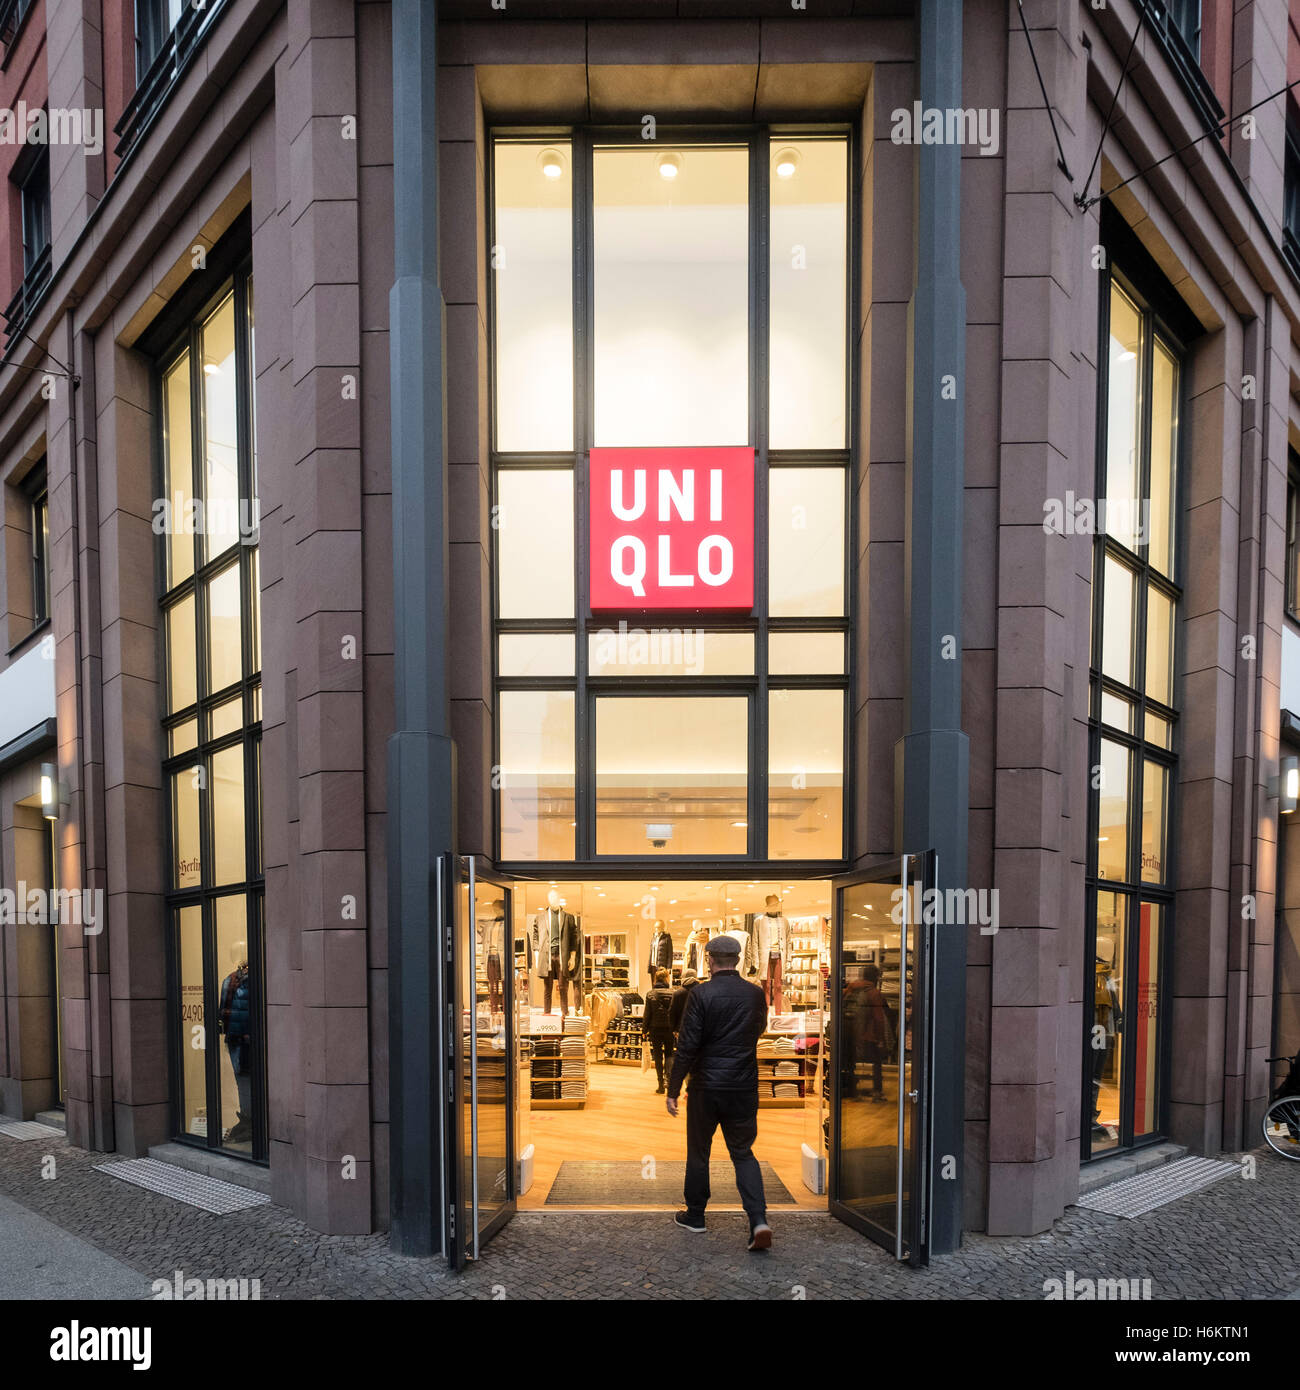 Uniqlo Store Clothing High Resolution Stock Photography and Images - Alamy